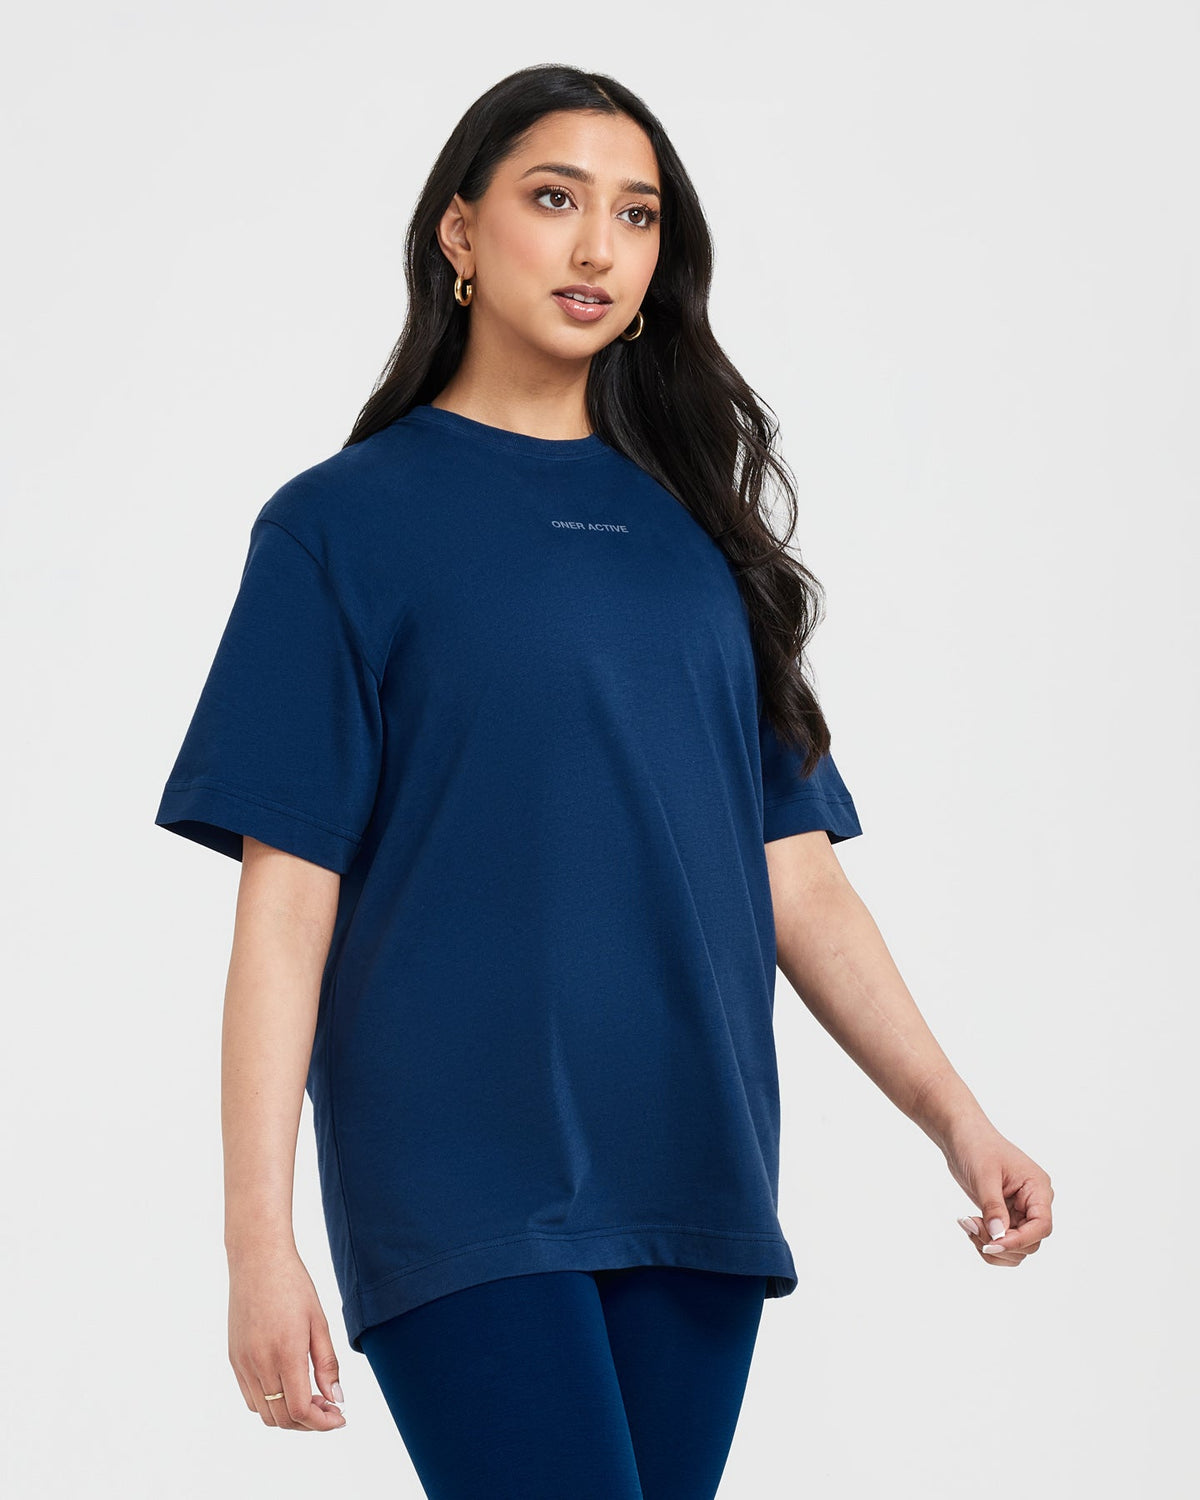 Oversized Graphic T-Shirts for Oner Women Active 